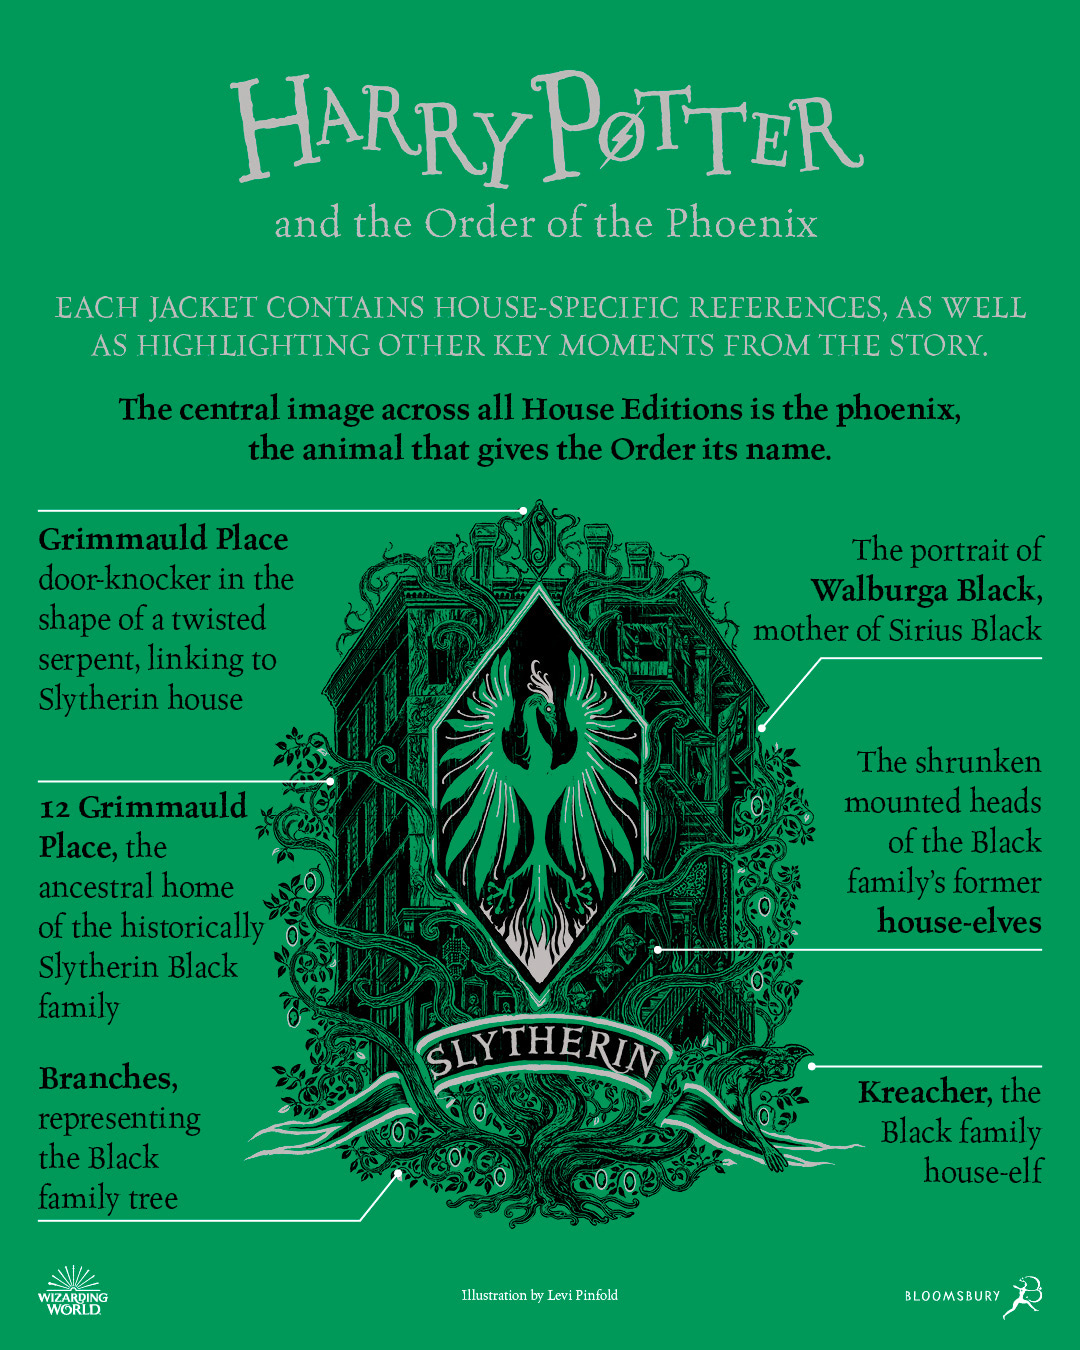 ‘Order of the Phoenix’ house edition cover artwork chart (Slytherin)